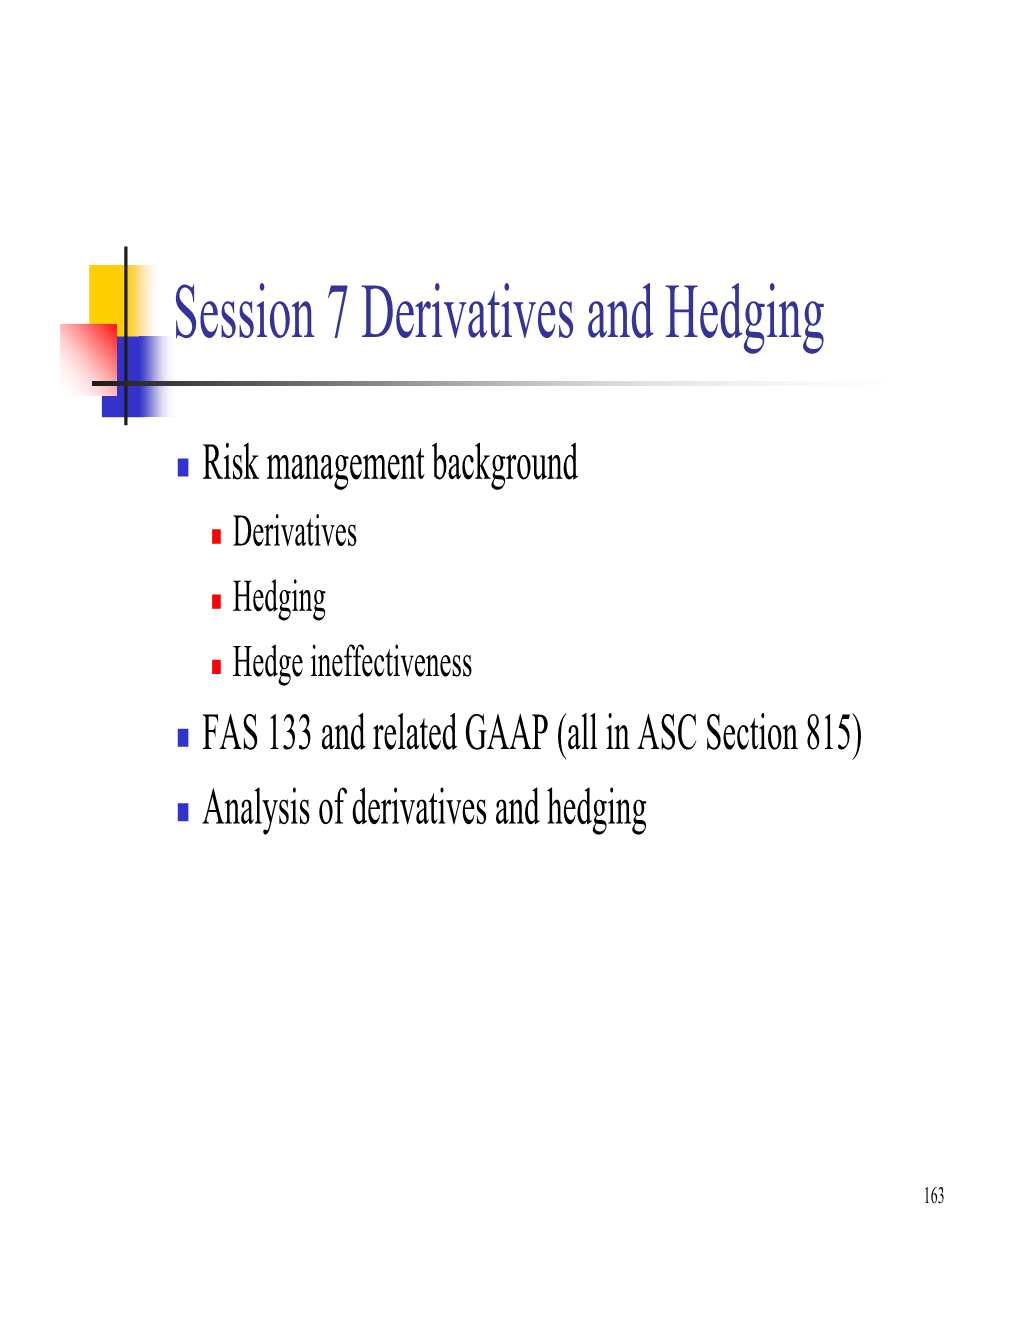 Session 7 Derivatives and Hedging